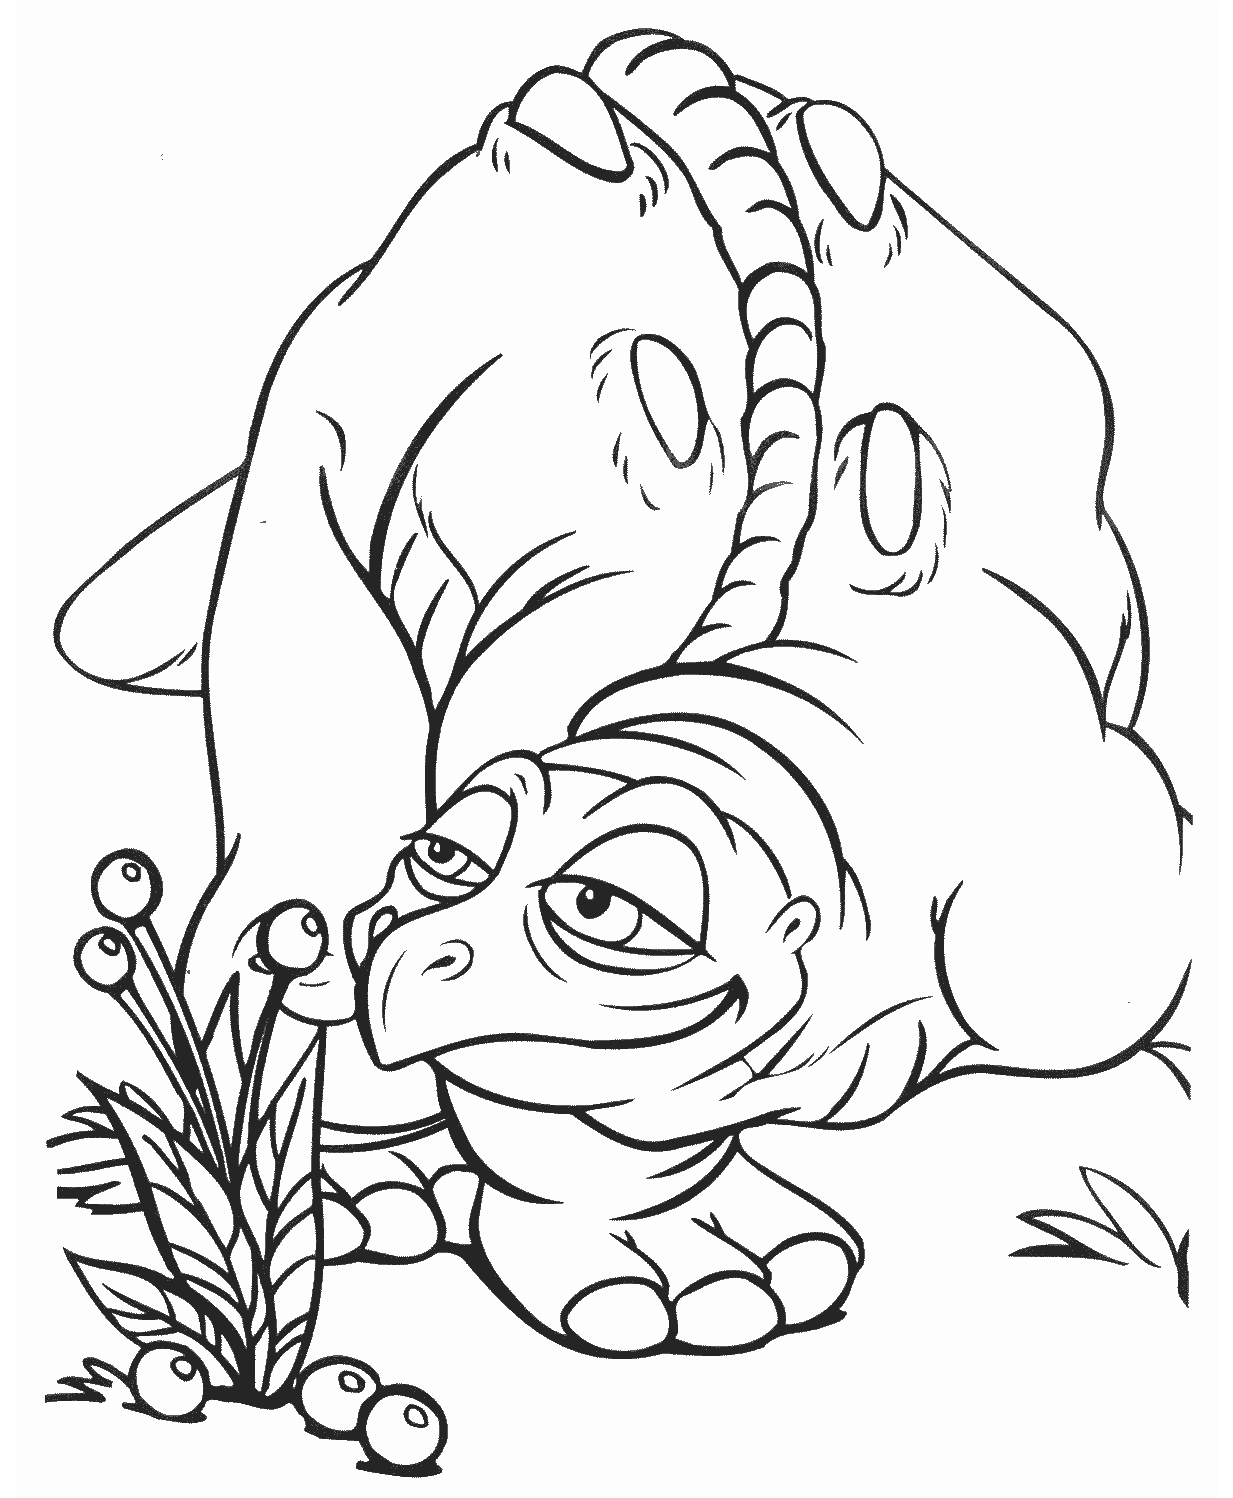 Dinosaurs Coloring Pages for boys lf6 Printable 2020 0321 Coloring4free